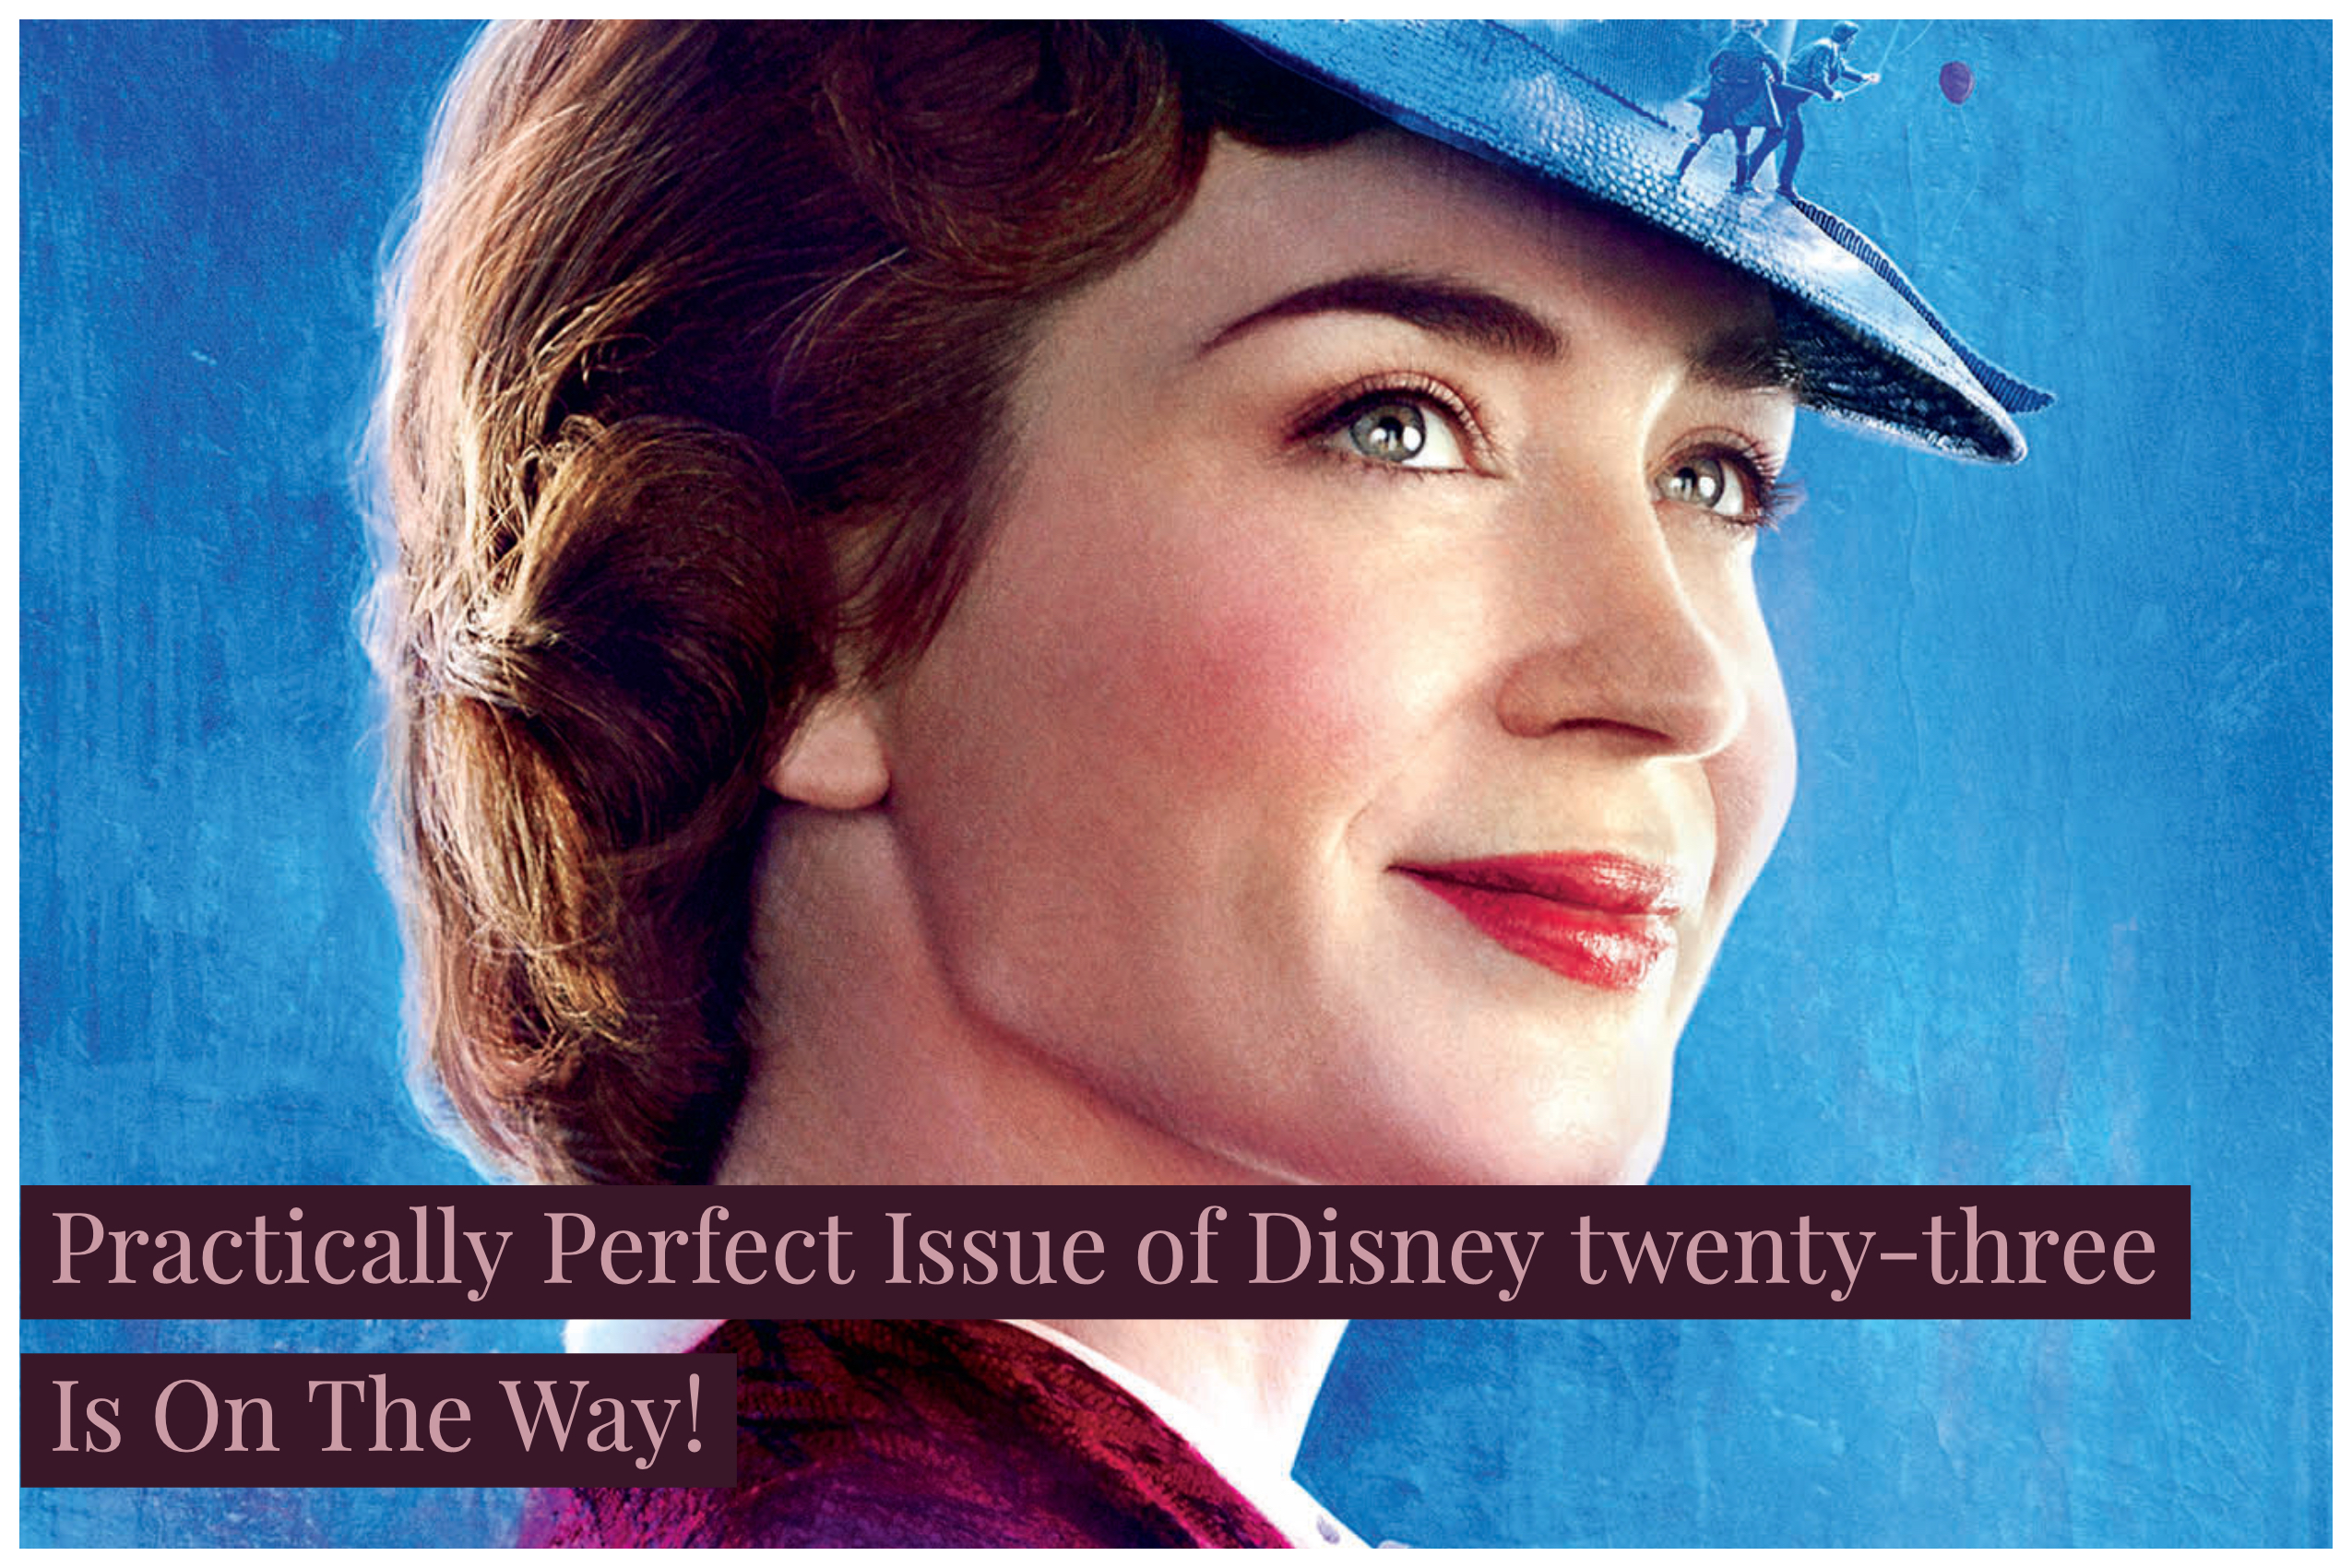 D23 To Have a Practically Perfect Issue of Disney twenty-three As It Celebrates Mary Poppins Returns